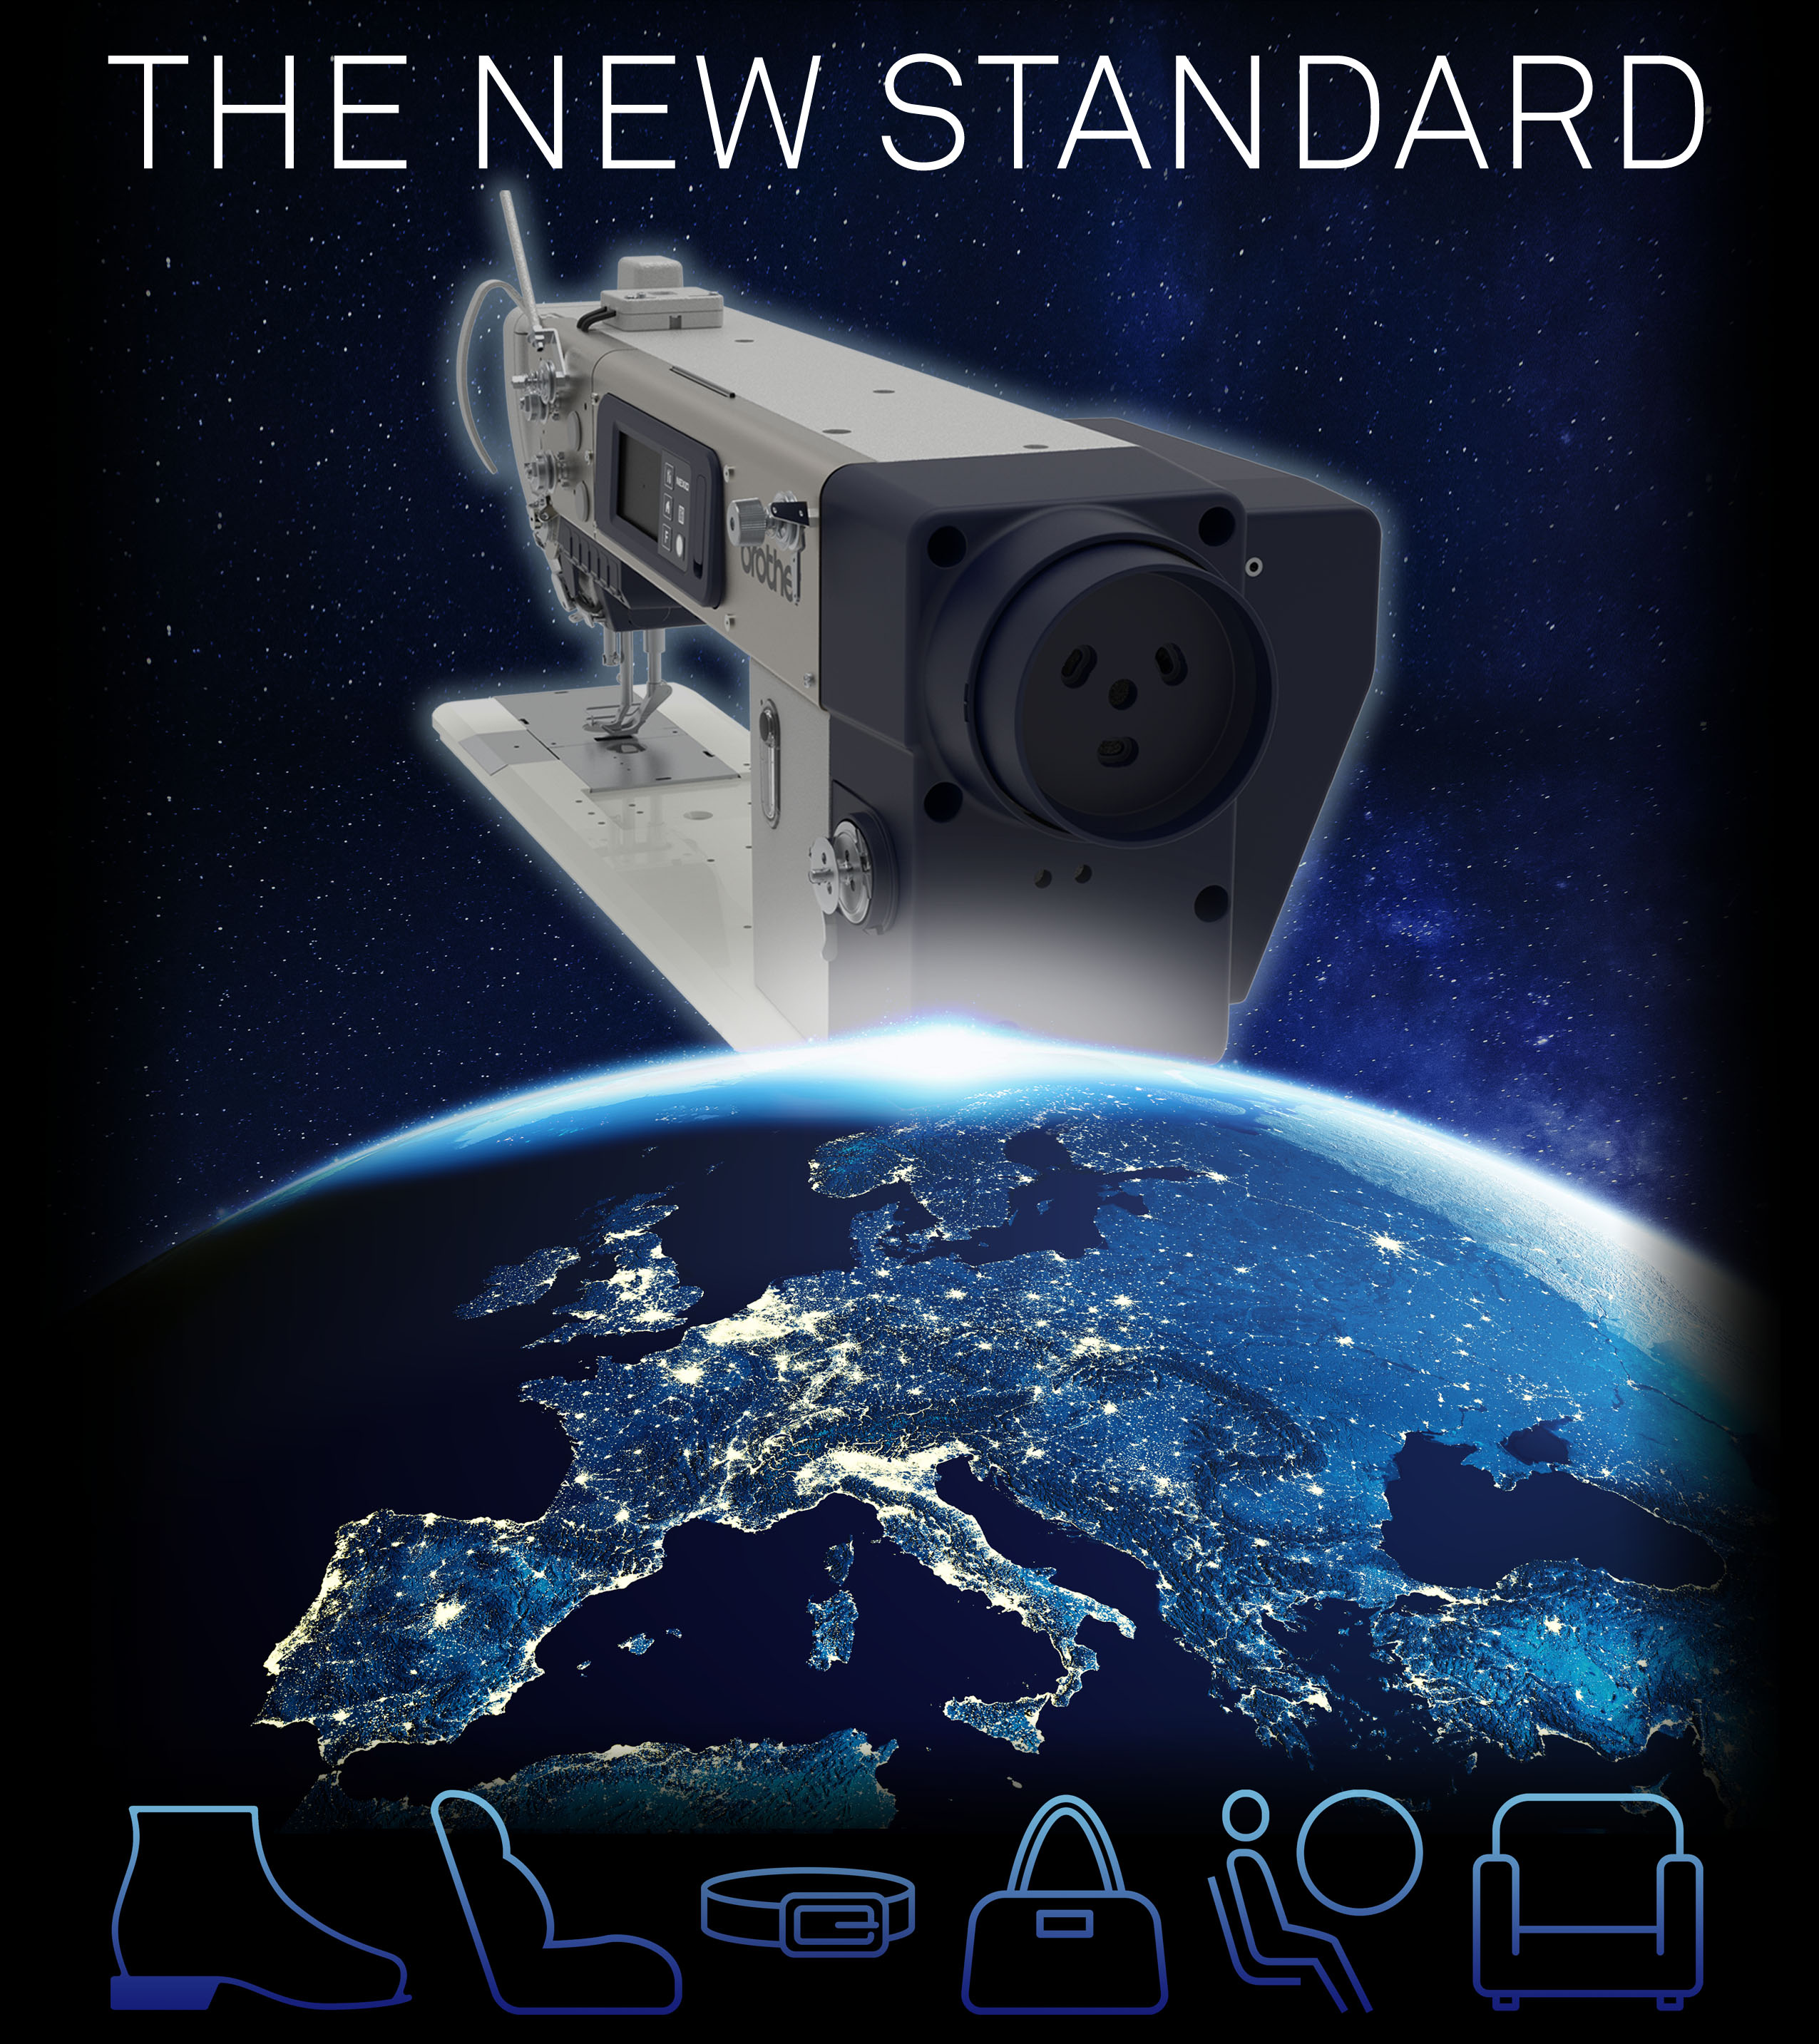 be prepared for the new standard